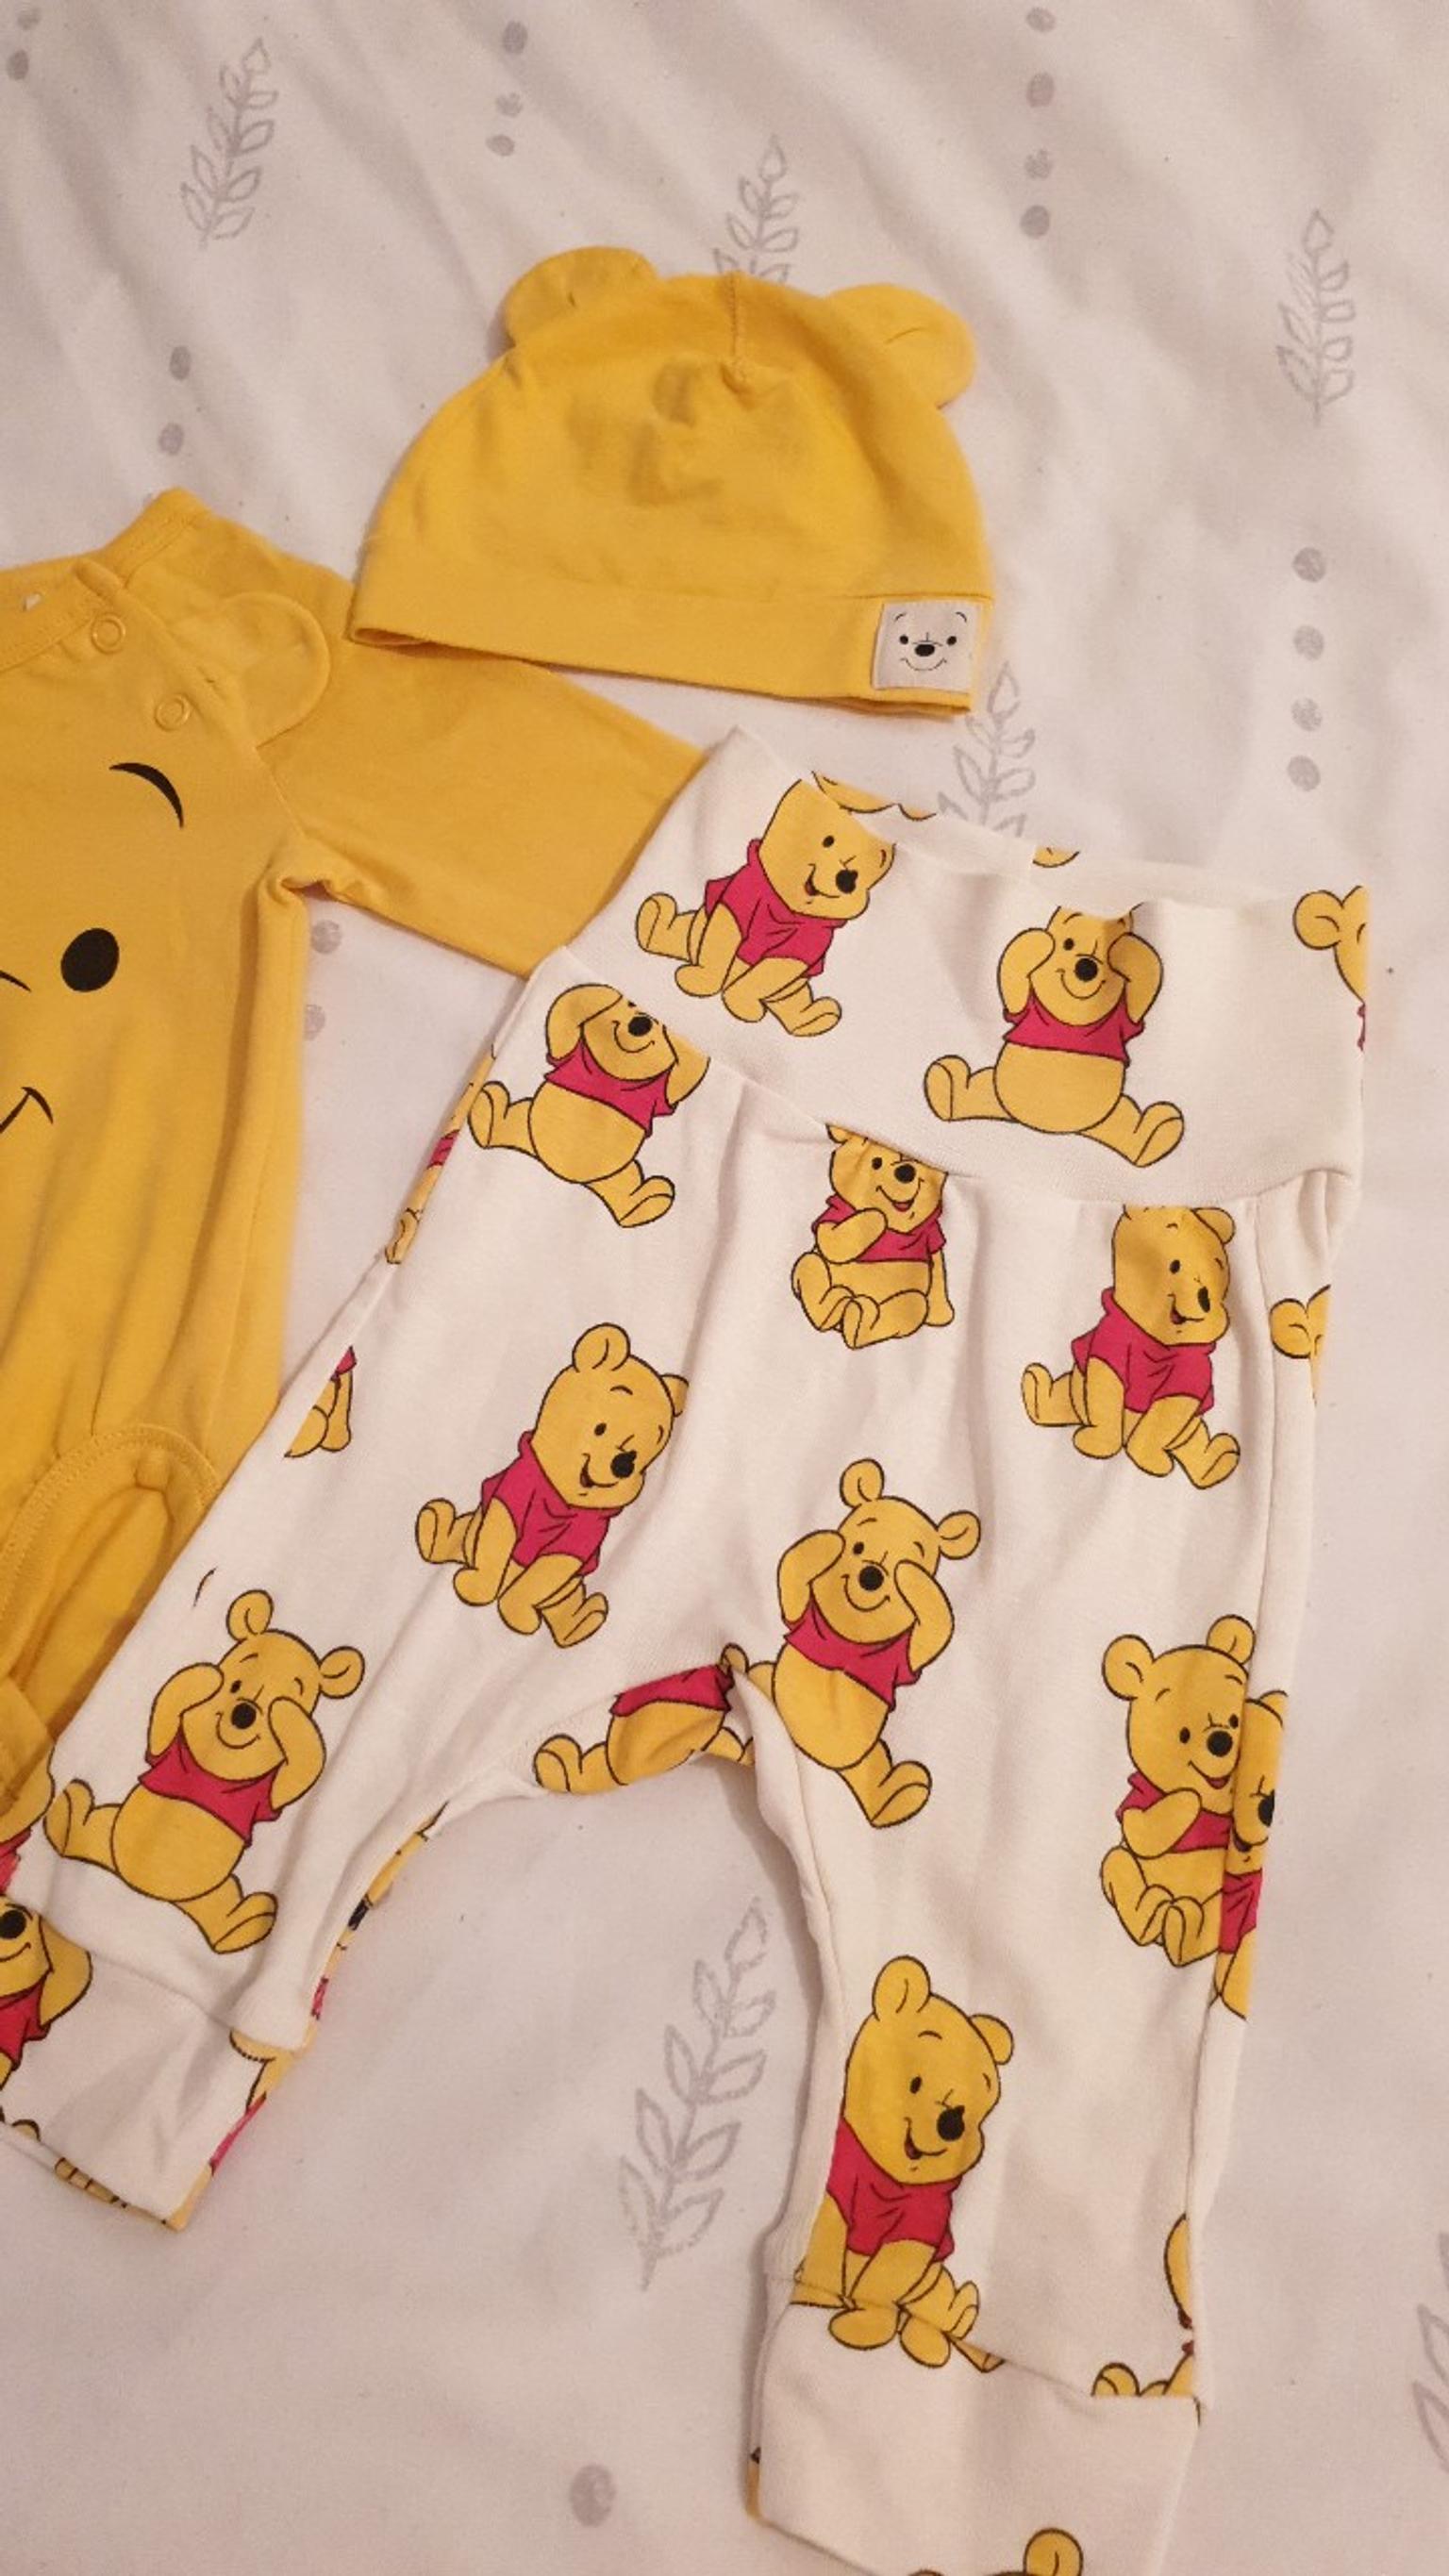 h&m pooh outfit